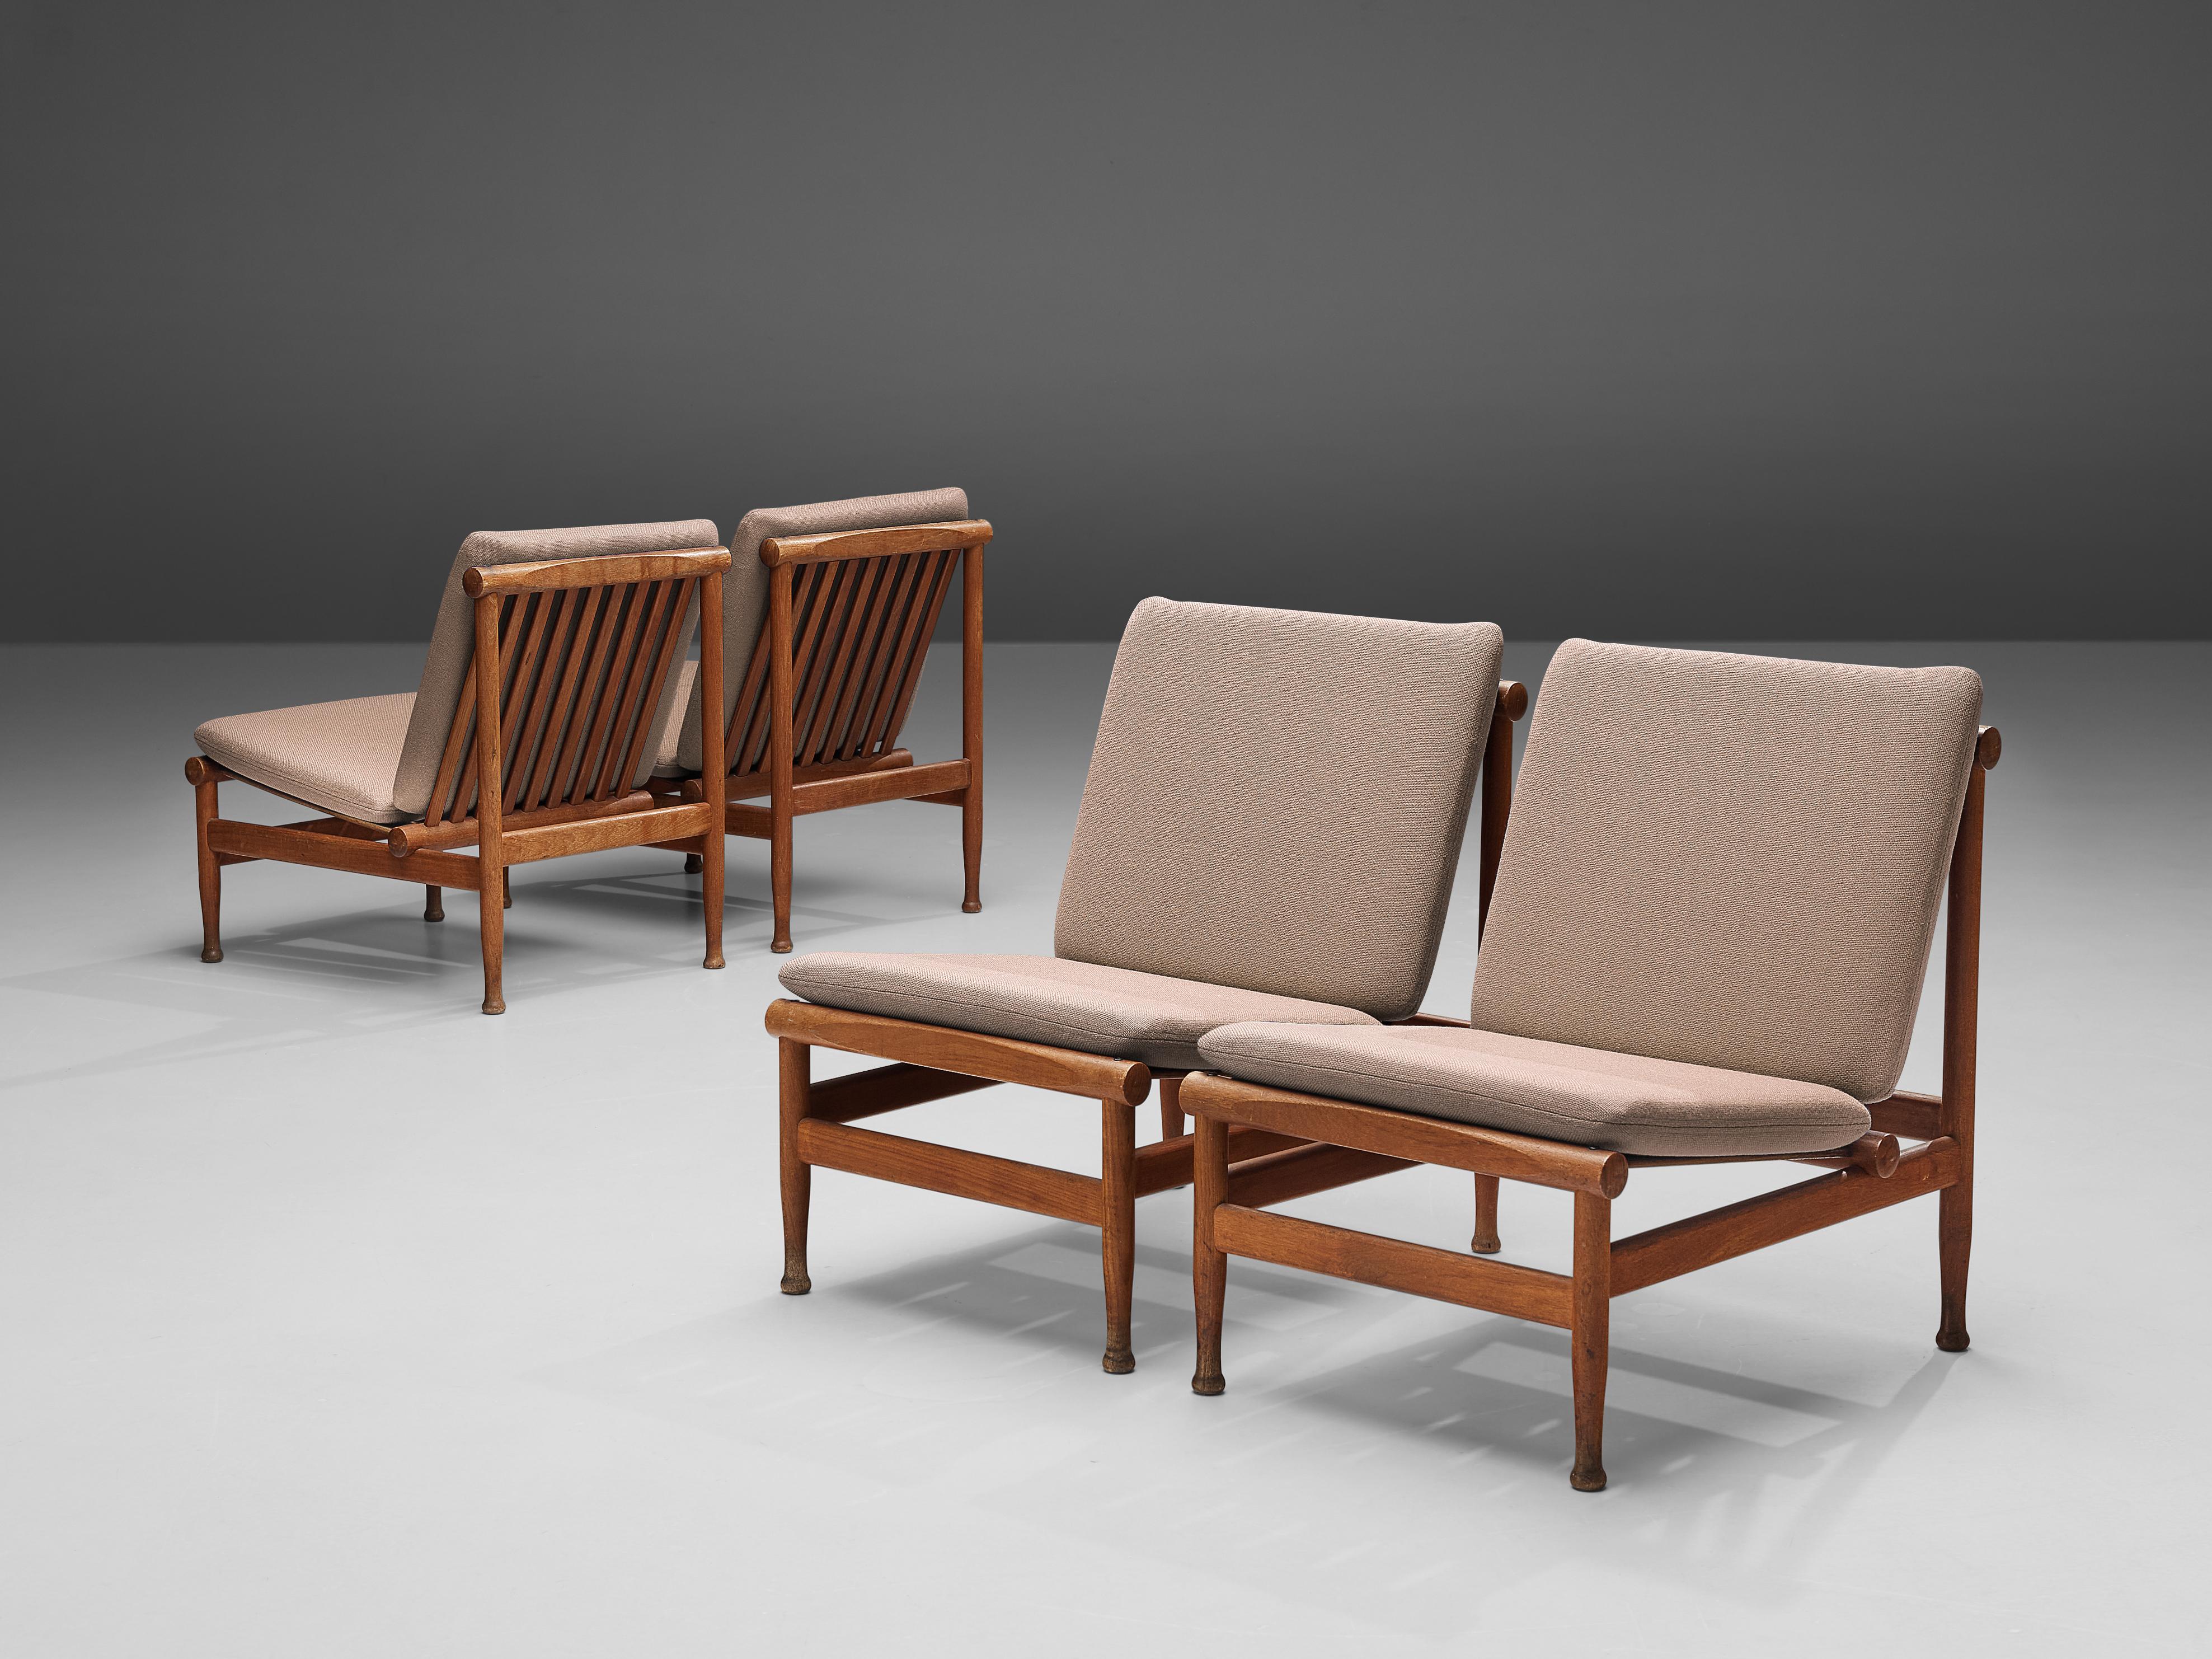 Kai Lyngfeldt-Larsen for Søborg Møbelfabrik, lounge chairs '501', teak, fabric, Denmark, 1960s

These sculptural '501' lounge chairs also nicknamed 'Japan Chair' is executed in teak by Kai Lyngfeldt-Larsen. This name refers to the aesthetics of